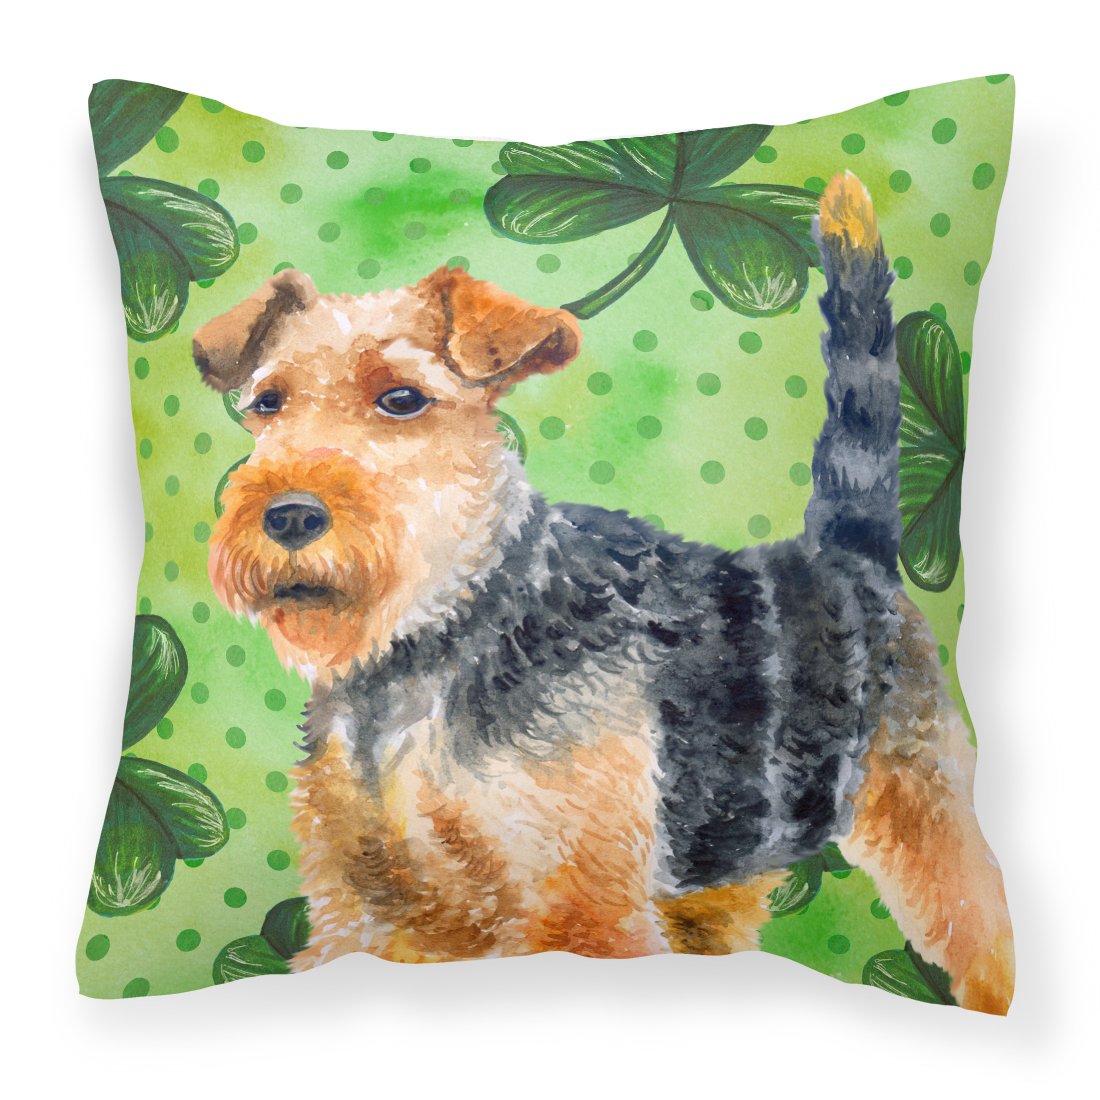 Welsh Terrier St Patrick's Fabric Decorative Pillow BB9874PW1818 by Caroline's Treasures